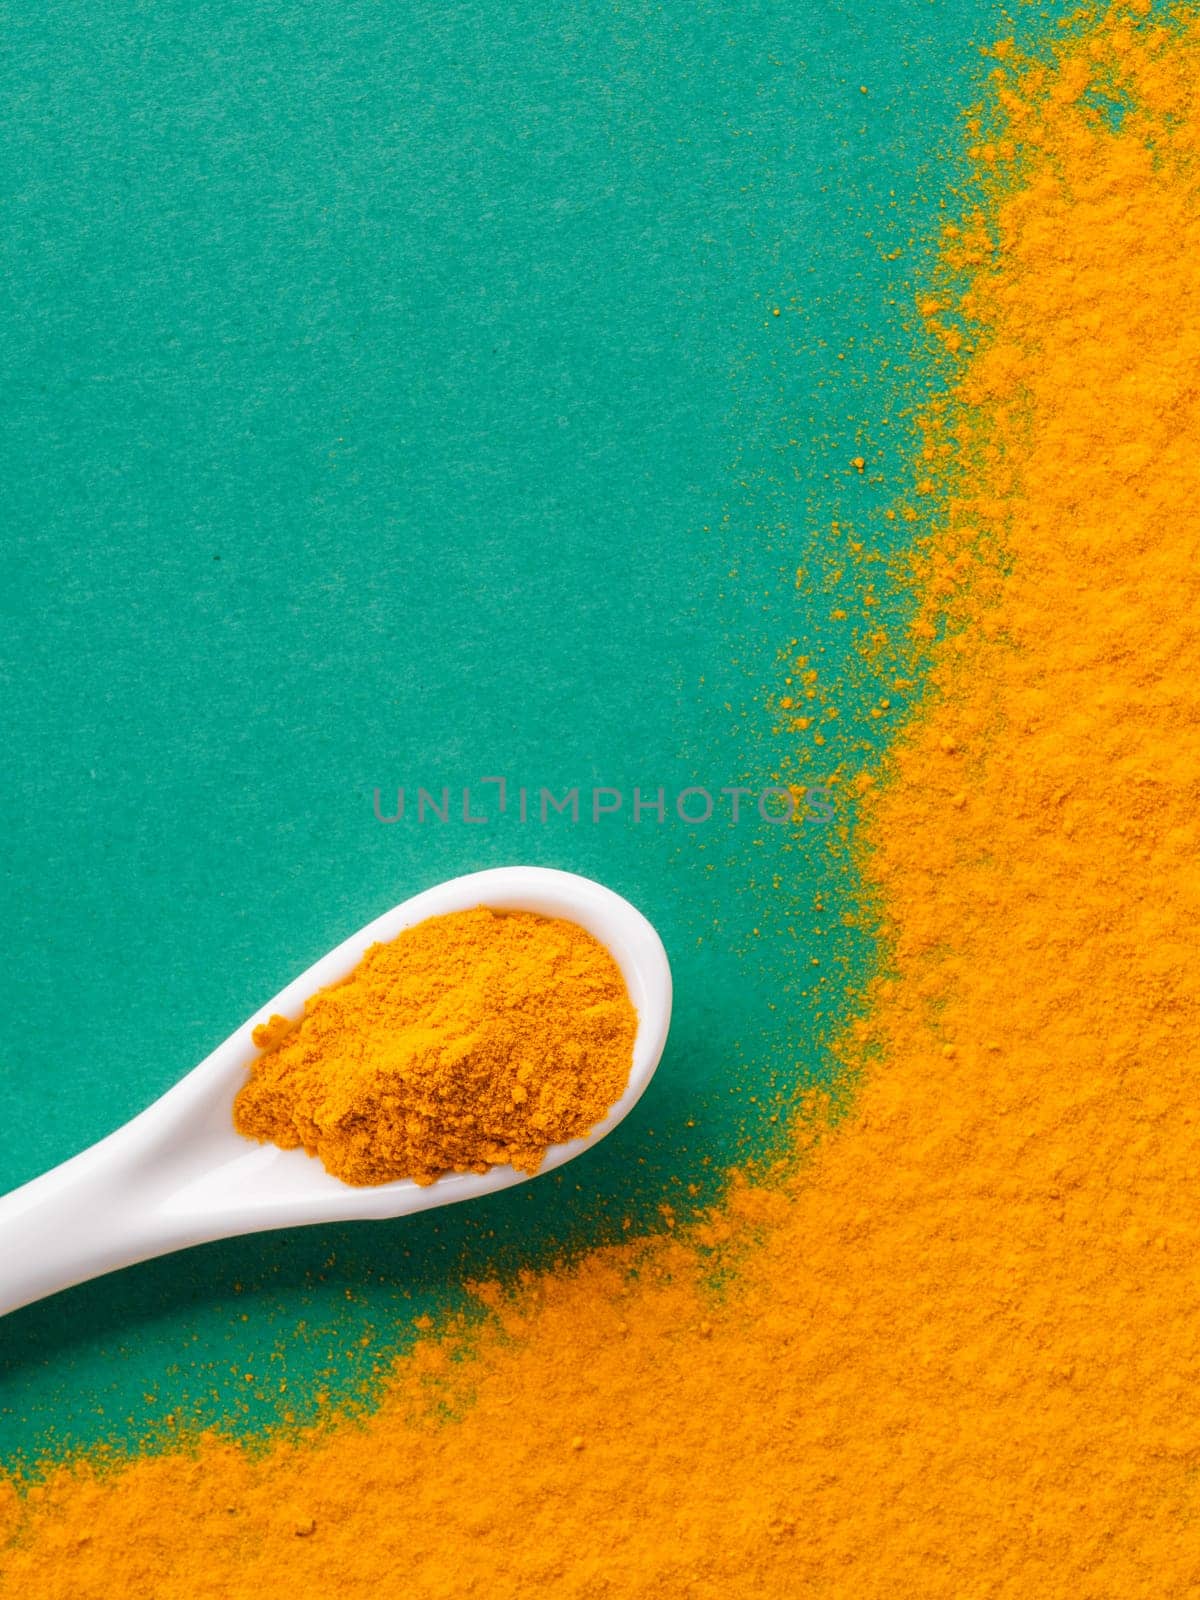 Turmeric Powder or Curcuma longa and white spoon with turmeric powder on green background. Top view. Copy space for text.